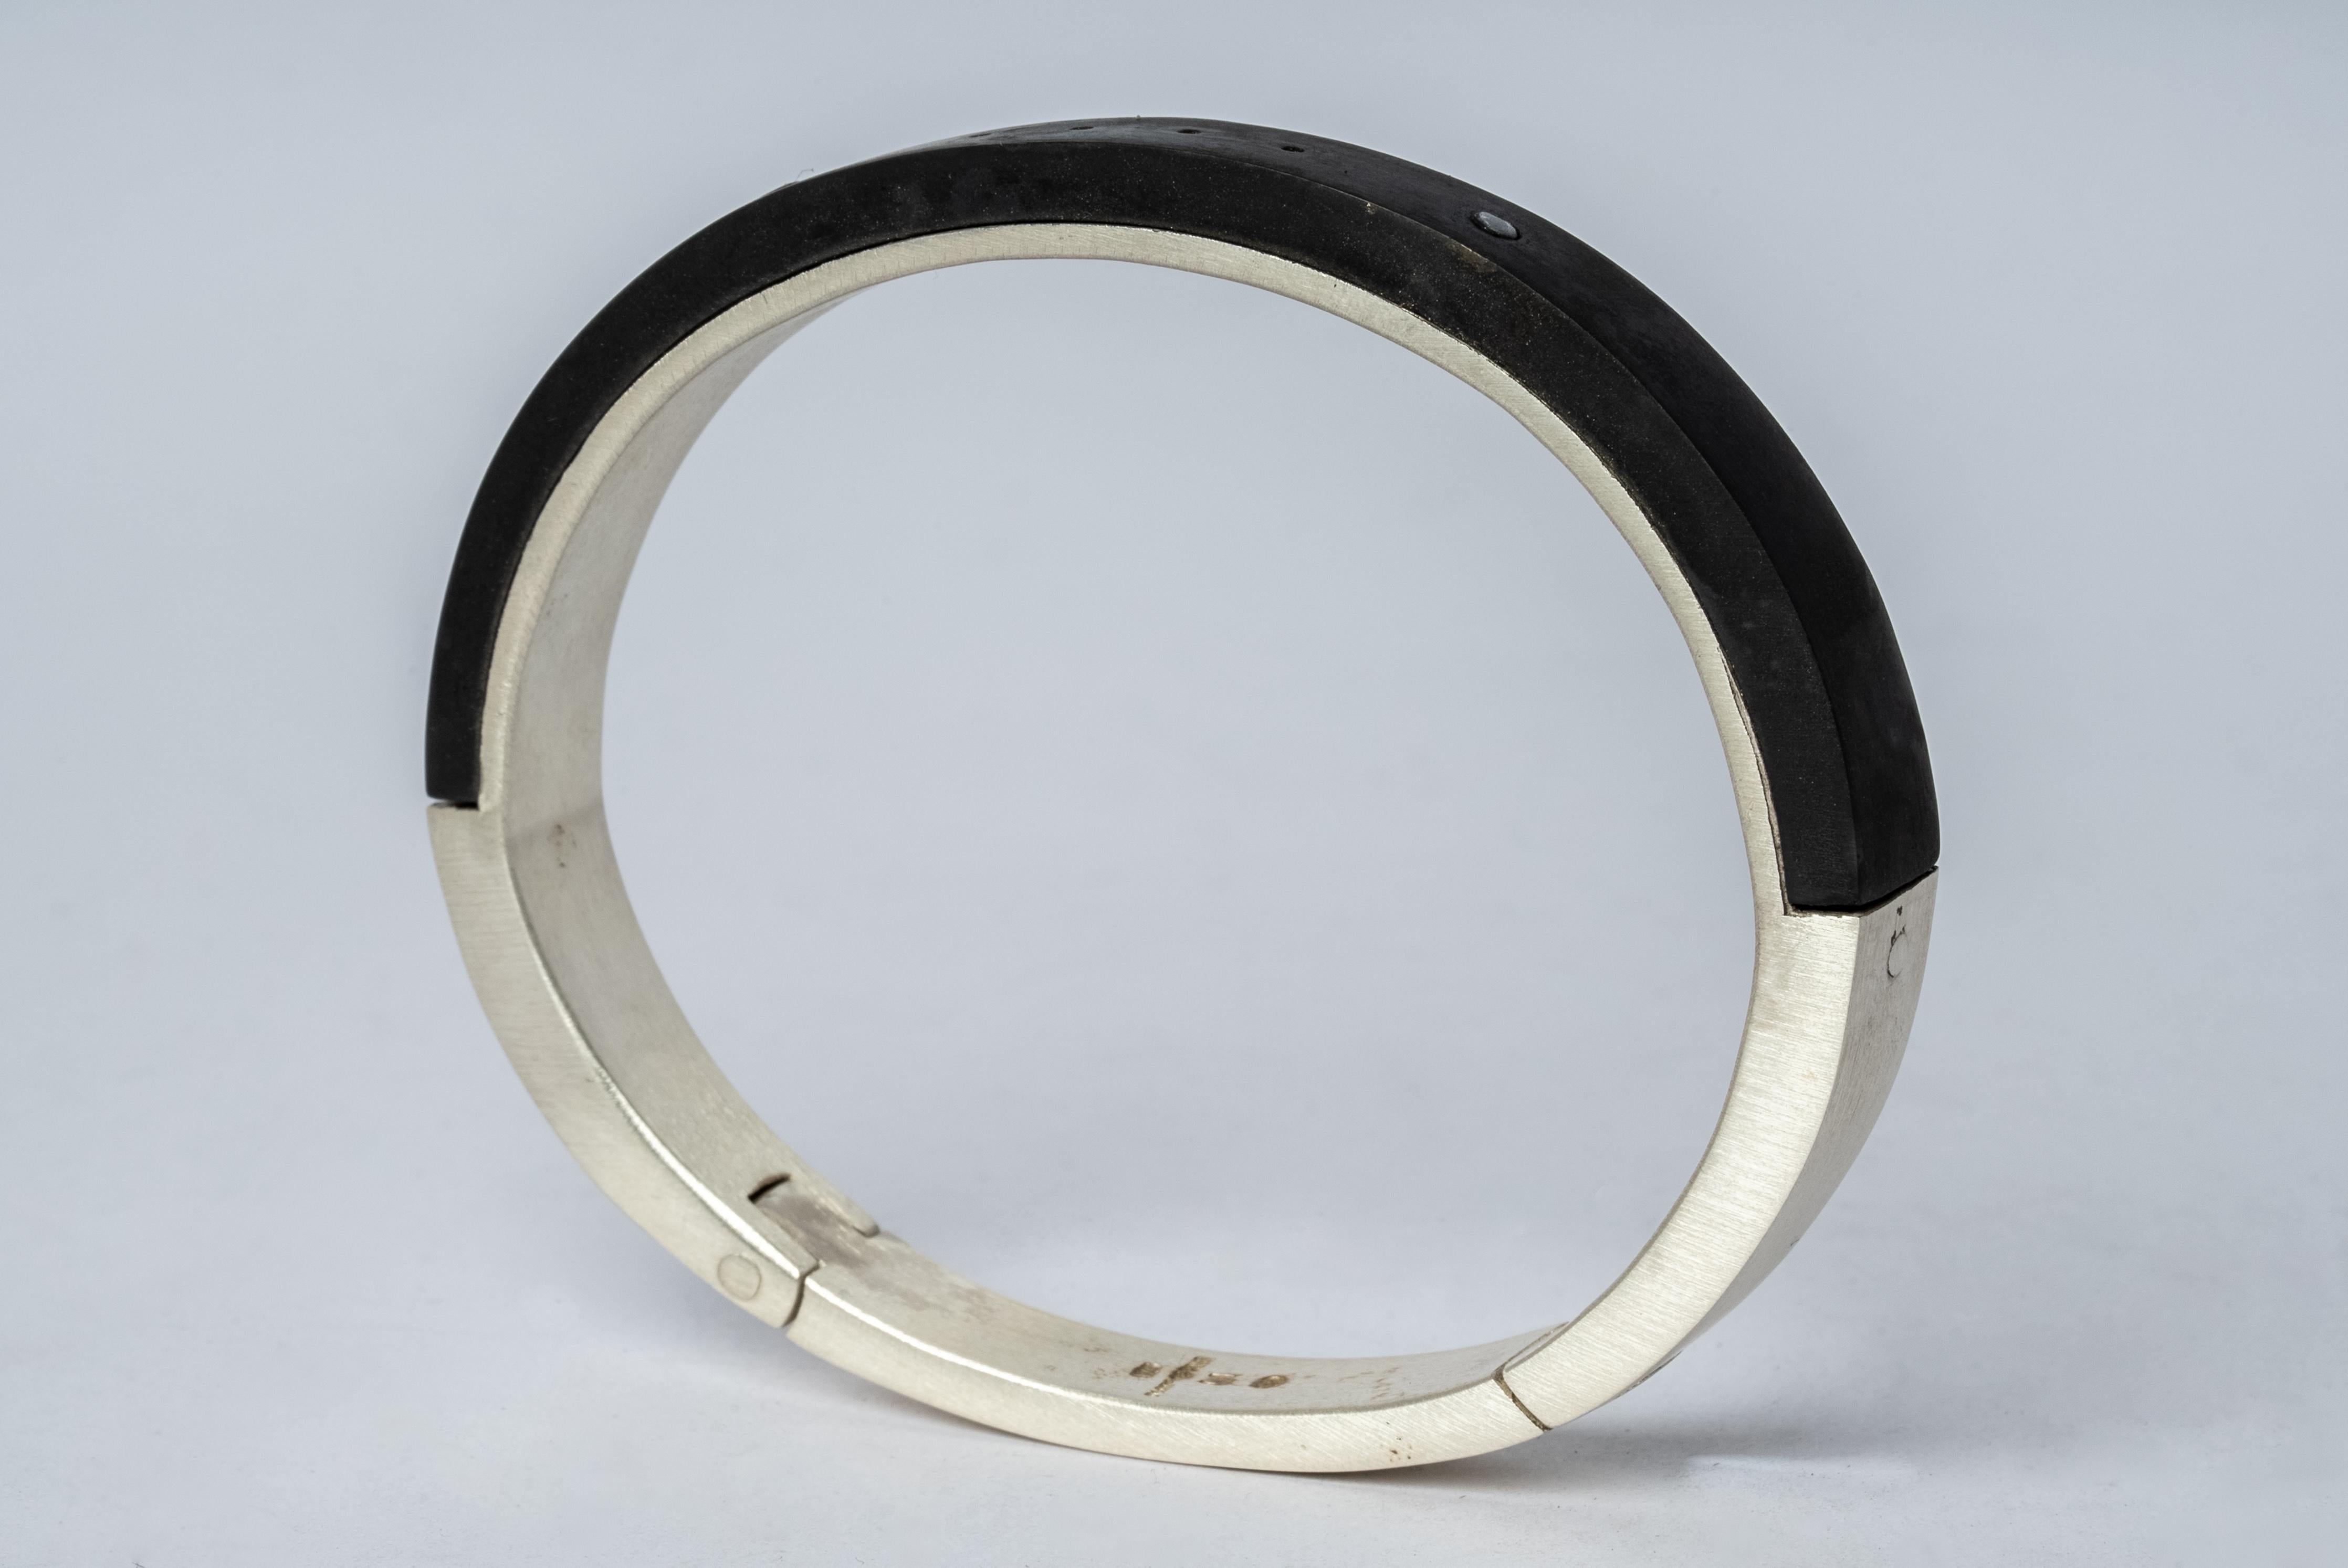 Bracelet in sterling silver and blackened bronze. The Sistema series expresses the core principle of P/4 which is modularity. The 